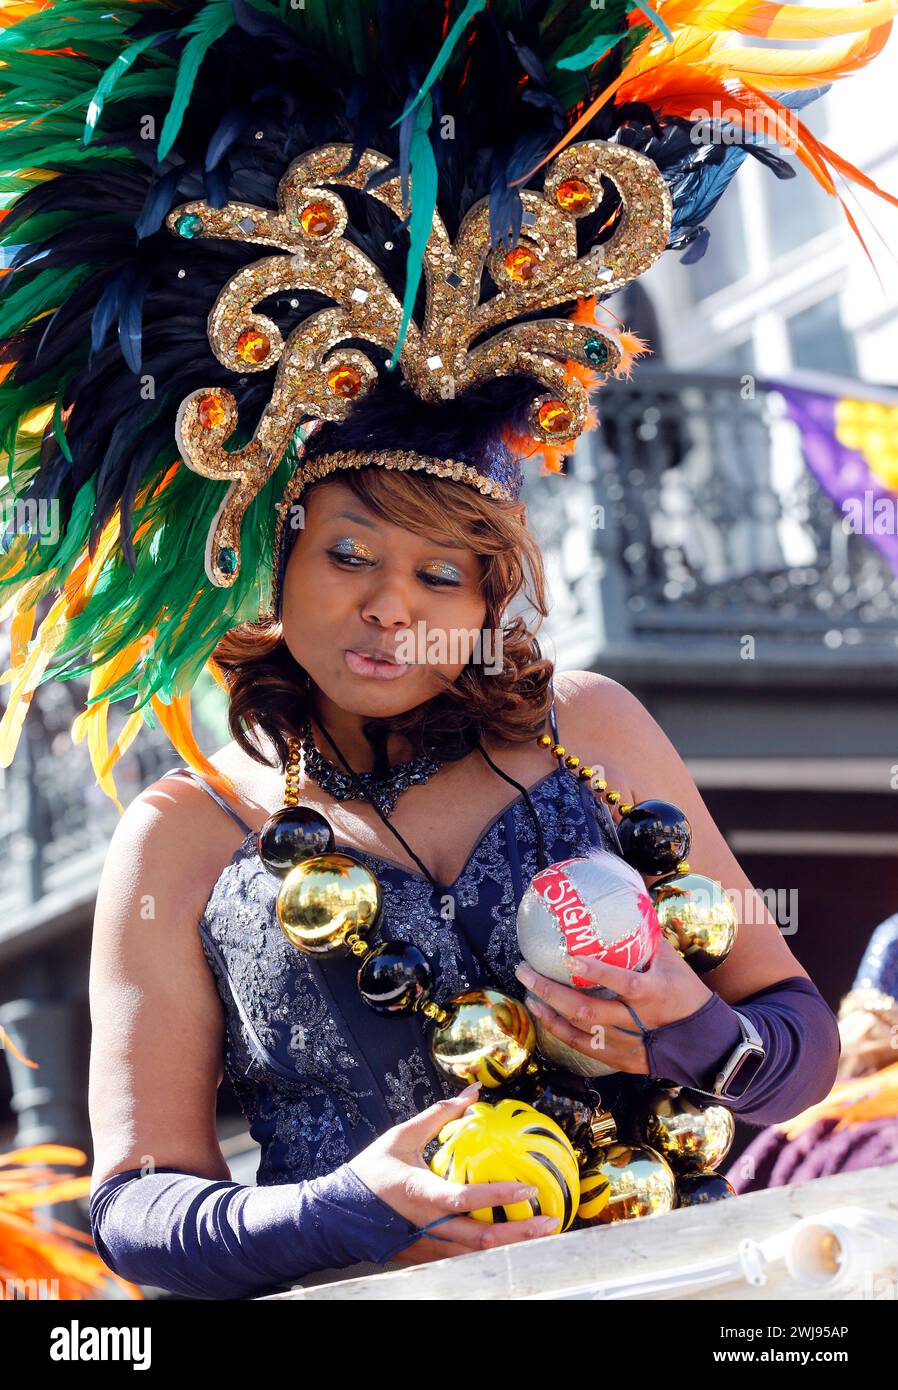 A rider in the Zulu parade holds a coveted coconut in New Orleans on